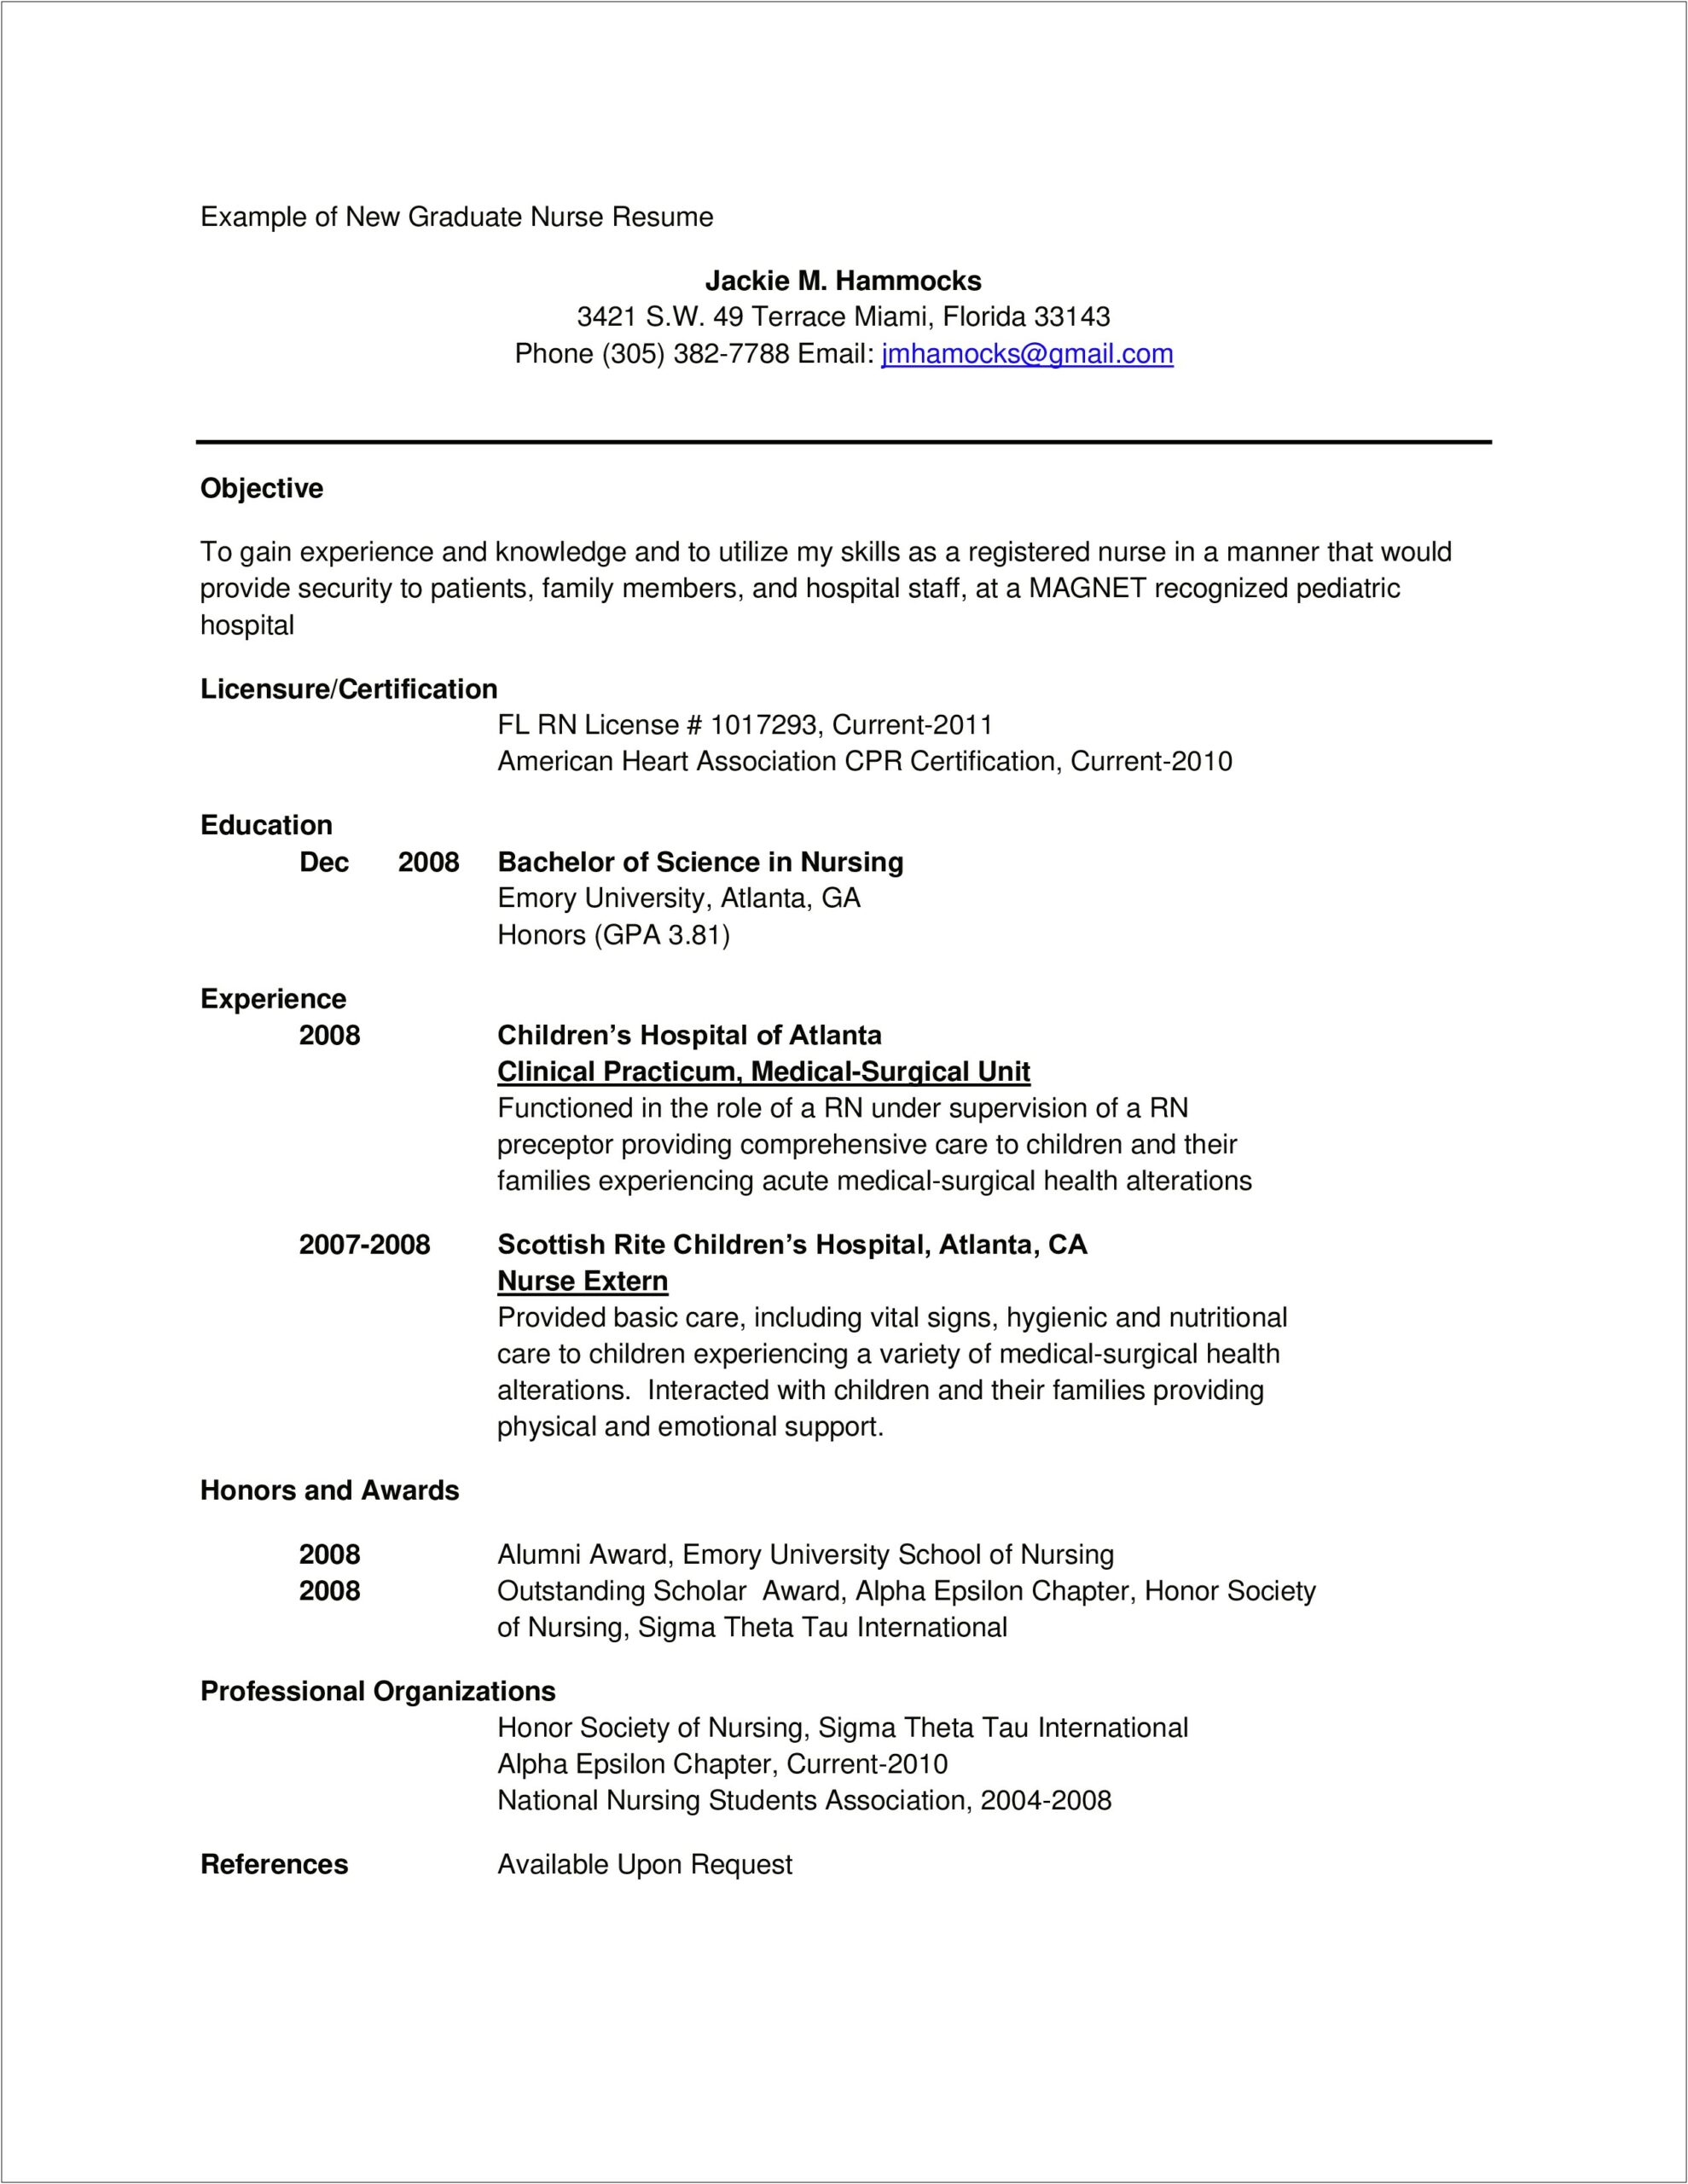 Example Resume For Acute Care Nurse Practitioner